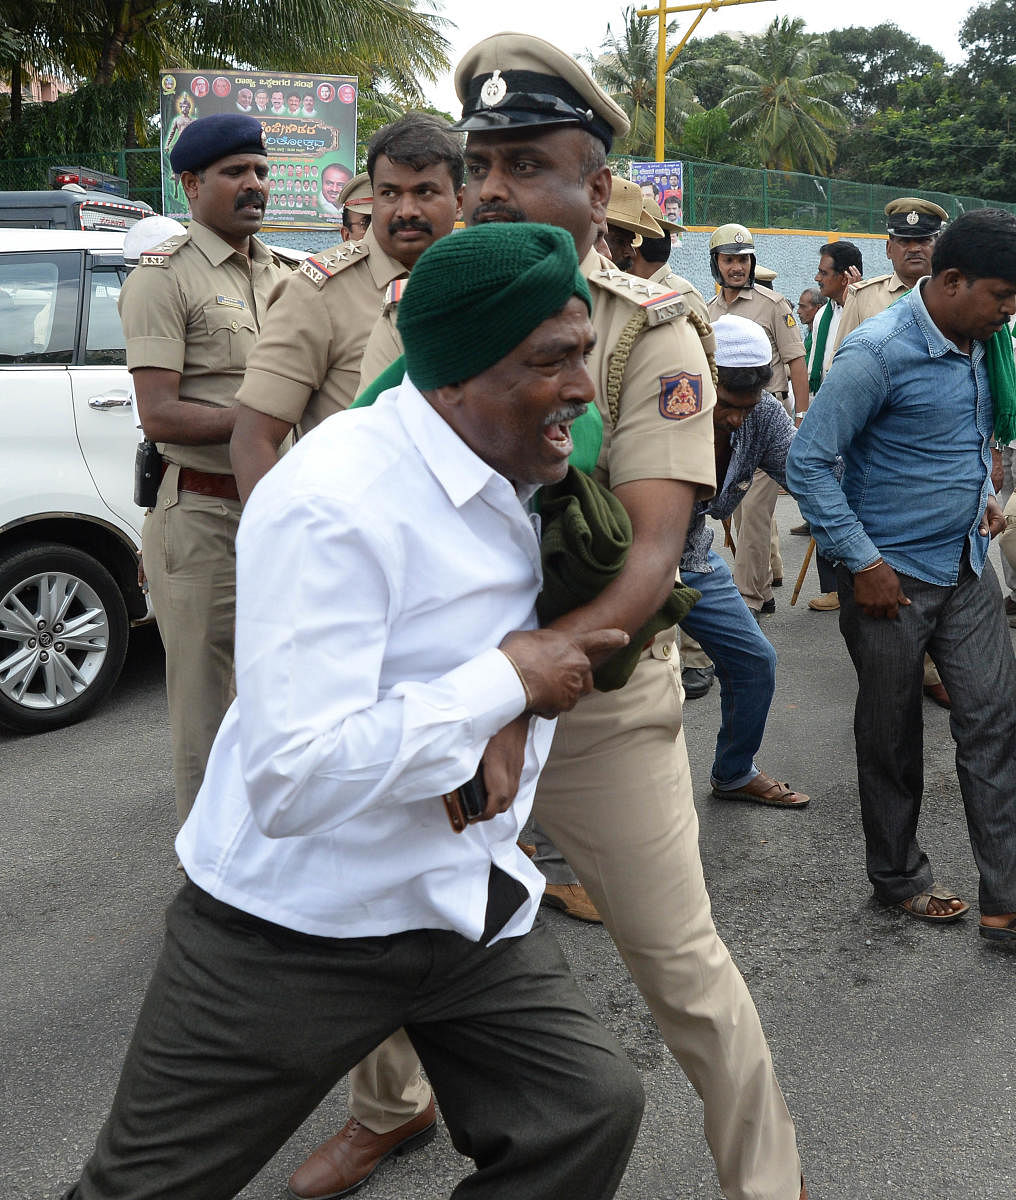 A policeman detains a protester near the Freedom Park on Monday. DH Photo/Satish Badiger